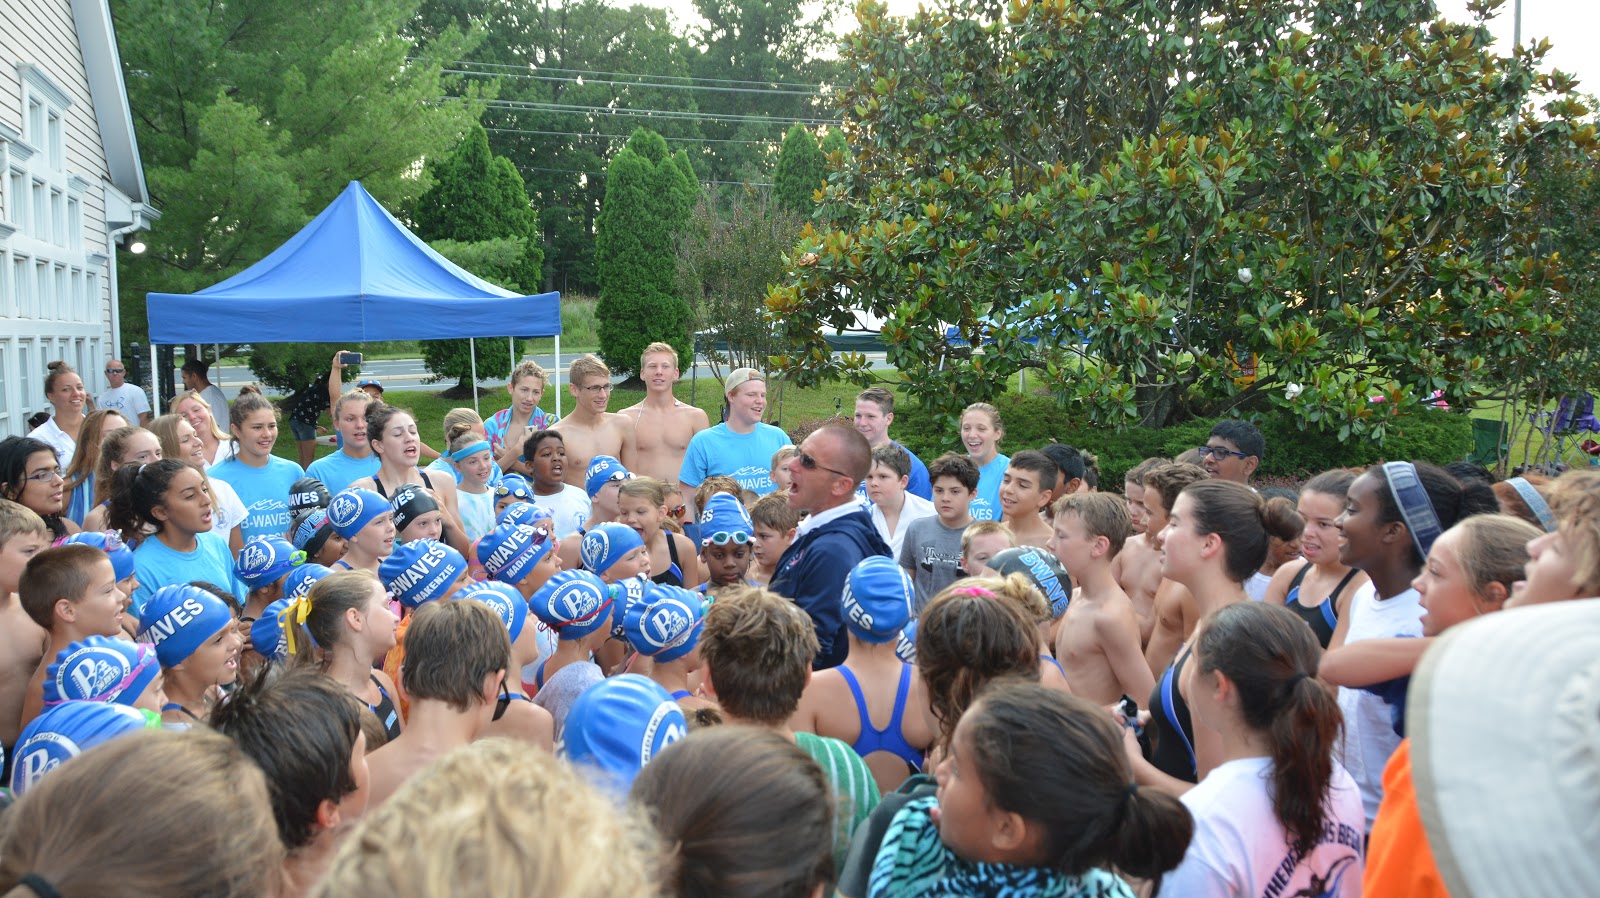 The BWaves get ready for a challenging meet against Kingsbrooke on Saturday, July 9th. (photo credit: Ginger Carroll)